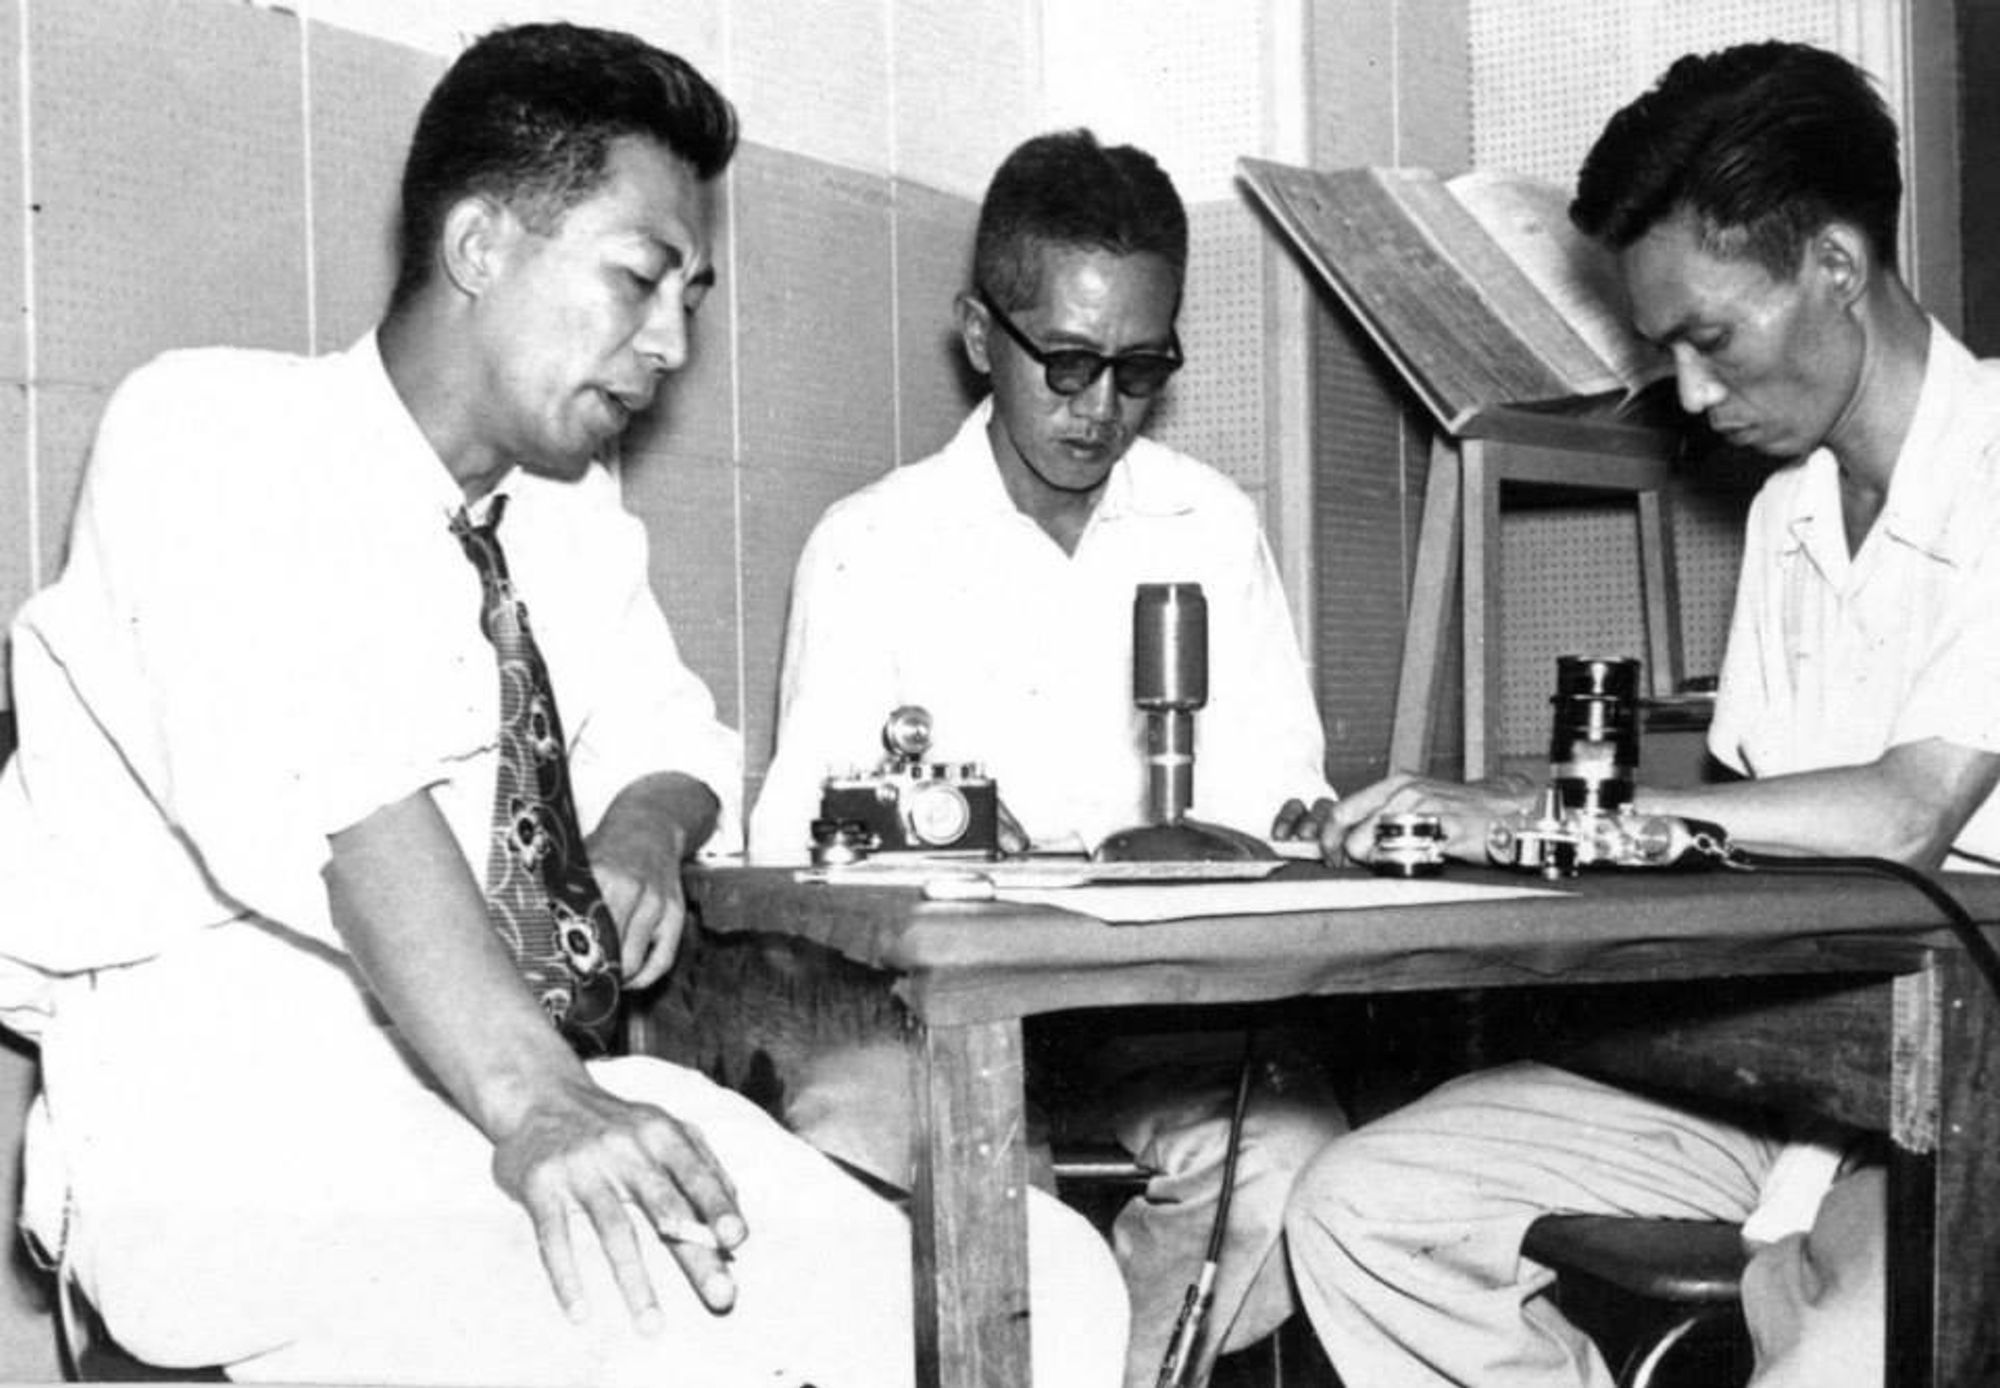 A black-and-white photograph of three photographers, including Protomartir, sitting at a table with cameras on it. They are all looking down at the table with concentration and one of them is holding a cigarette in his hand.